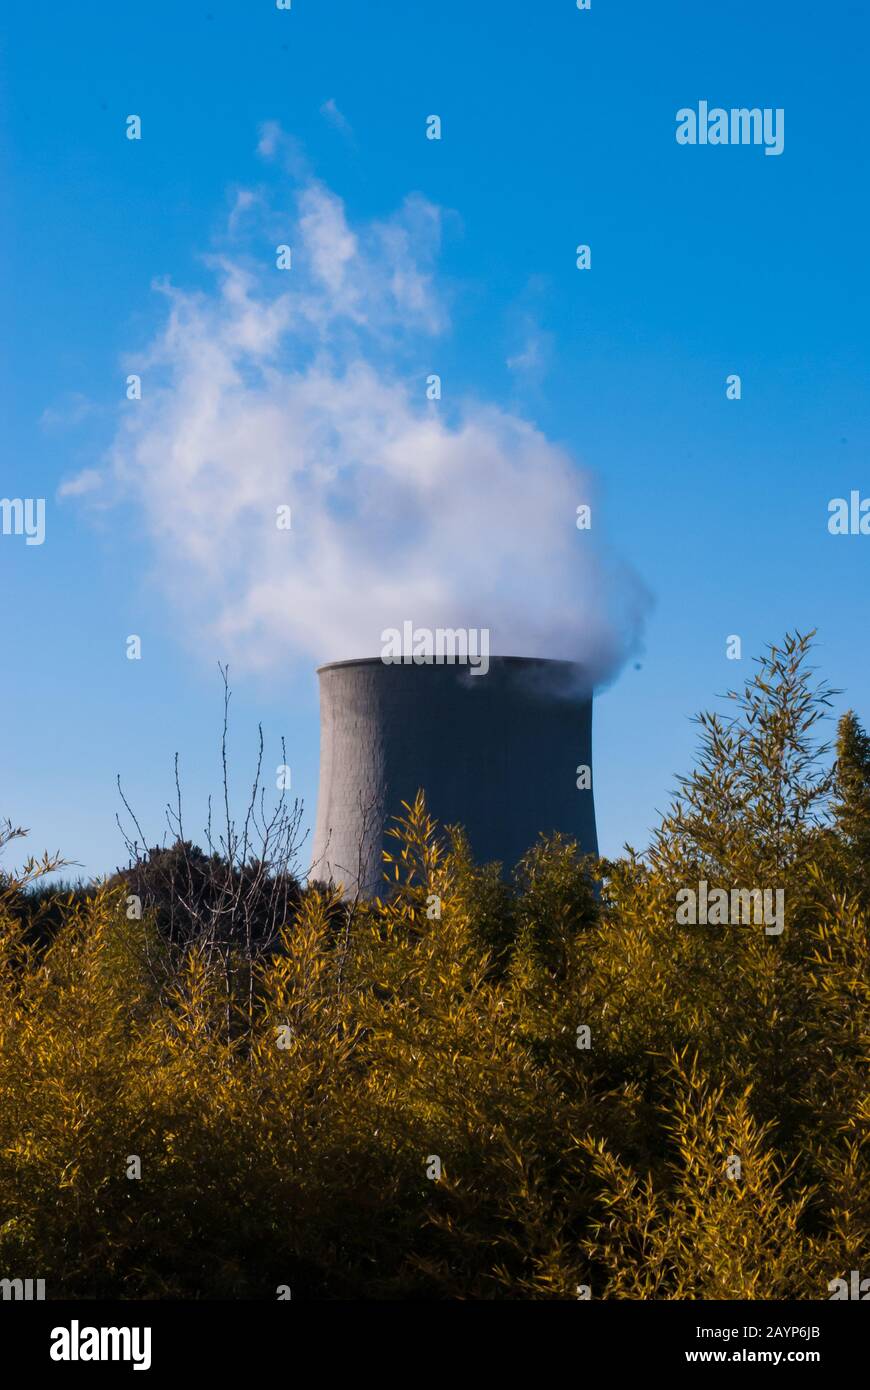 A geothermal power station chimney in Sasso Pisano, Tuscany Italy Stock Photo